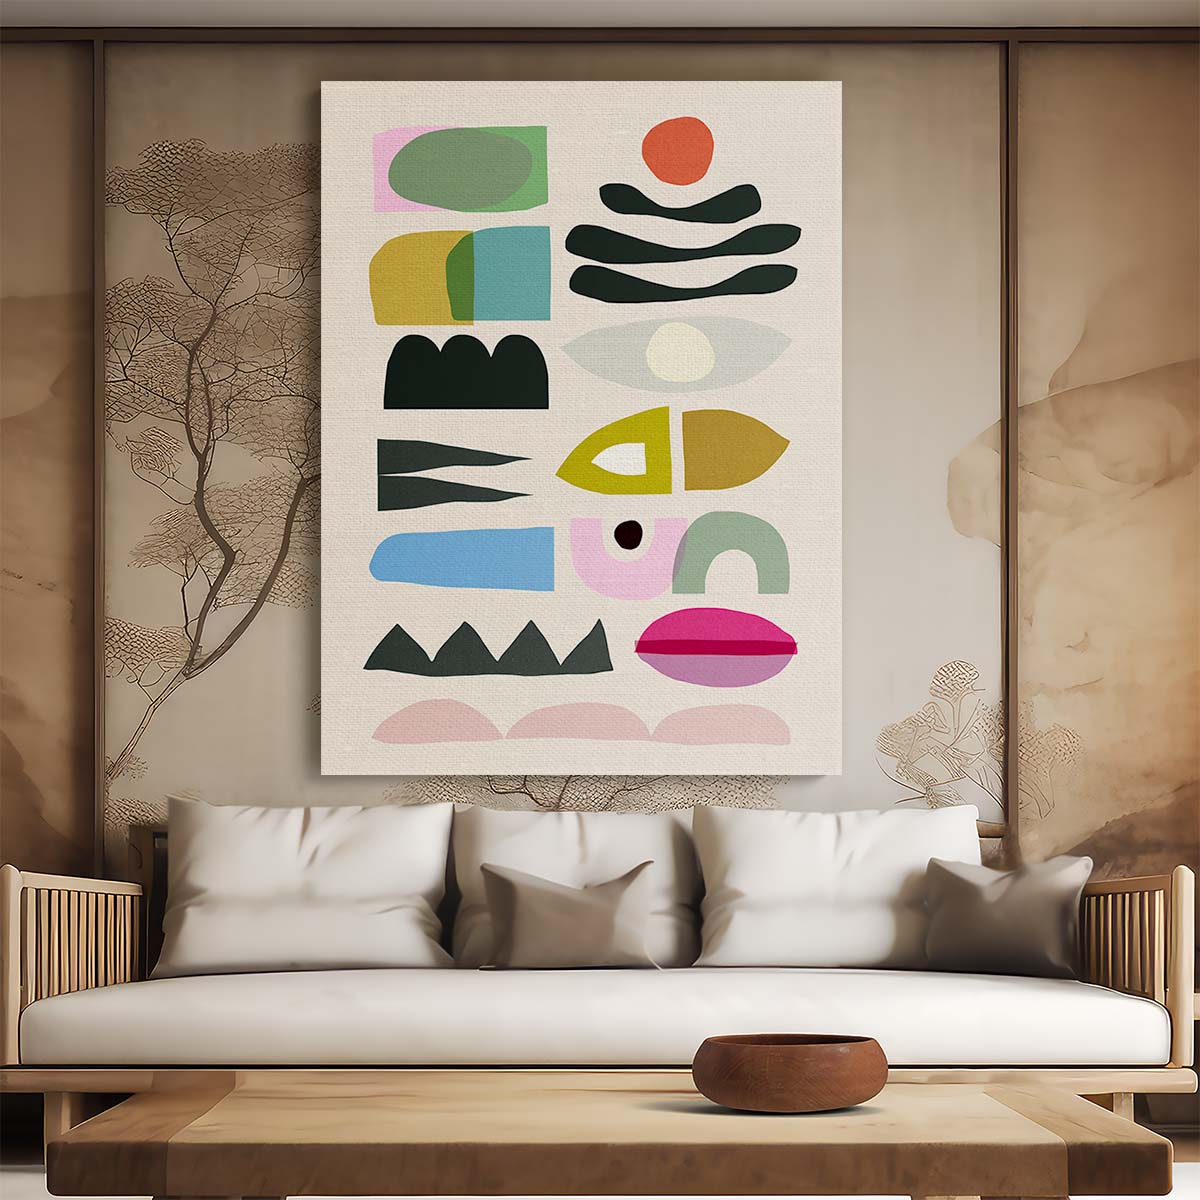 Dan Hobday's Abstract Geometry Nord No2 Illustration, Organic Bright Colors by Luxuriance Designs, made in USA